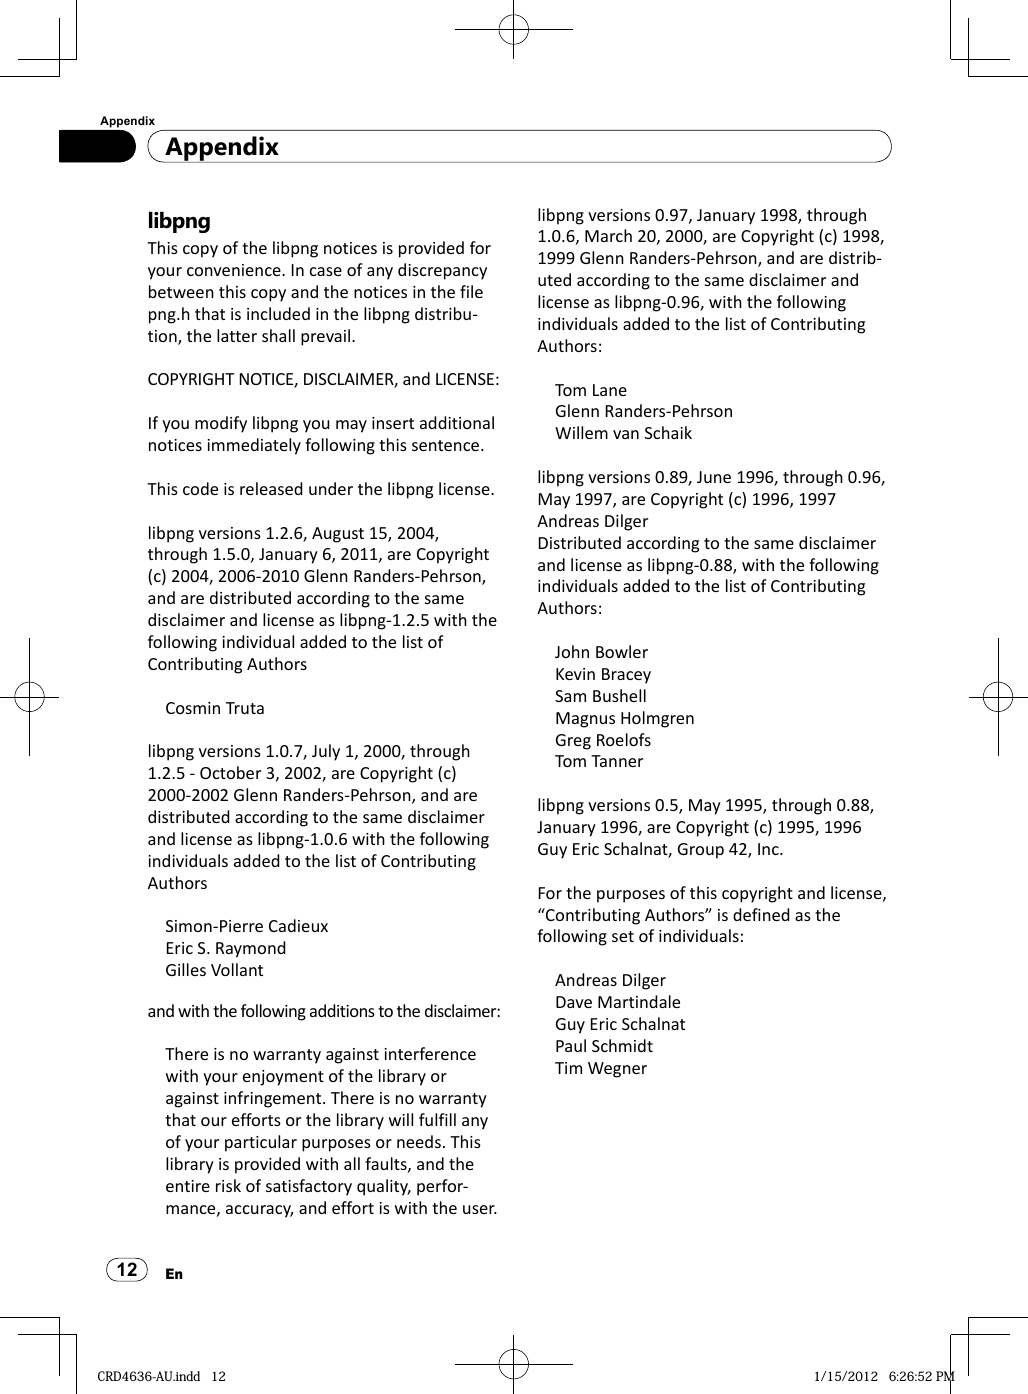 AppendixAppendix12EnlibpngThis copy of the libpng notices is provided for your convenience. In case of any discrepancy between this copy and the notices in the file png.h that is included in the libpng distribu-tion, the latter shall prevail.COPYRIGHT NOTICE, DISCLAIMER, and LICENSE:If you modify libpng you may insert additional notices immediately following this sentence.This code is released under the libpng license.libpng versions 1.2.6, August 15, 2004, through 1.5.0, January 6, 2011, are Copyright (c) 2004, 2006-2010 Glenn Randers-Pehrson, and are distributed according to the same disclaimer and license as libpng-1.2.5 with the following individual added to the list of Contributing AuthorsCosmin Trutalibpng versions 1.0.7, July 1, 2000, through 1.2.5 - October 3, 2002, are Copyright (c) 2000-2002 Glenn Randers-Pehrson, and are distributed according to the same disclaimer and license as libpng-1.0.6 with the following individuals added to the list of Contributing AuthorsSimon-Pierre CadieuxEric S. RaymondGilles Vollantand with the following additions to the disclaimer:There is no warranty against interference with your enjoyment of the library or against infringement. There is no warranty that our efforts or the library will fulfill any of your particular purposes or needs. This library is provided with all faults, and the entire risk of satisfactory quality, perfor-mance, accuracy, and effort is with the user.libpng versions 0.97, January 1998, through 1.0.6, March 20, 2000, are Copyright (c) 1998, 1999 Glenn Randers-Pehrson, and are distrib-uted according to the same disclaimer and license as libpng-0.96, with the following individuals added to the list of Contributing Authors:Tom LaneGlenn Randers-PehrsonWillem van Schaiklibpng versions 0.89, June 1996, through 0.96, May 1997, are Copyright (c) 1996, 1997 Andreas DilgerDistributed according to the same disclaimer and license as libpng-0.88, with the following individuals added to the list of Contributing Authors:John BowlerKevin BraceySam BushellMagnus HolmgrenGreg RoelofsTom Tannerlibpng versions 0.5, May 1995, through 0.88, January 1996, are Copyright (c) 1995, 1996 Guy Eric Schalnat, Group 42, Inc.For the purposes of this copyright and license, “Contributing Authors” is defined as the following set of individuals:Andreas DilgerDave MartindaleGuy Eric SchalnatPaul SchmidtTim WegnerCRD4636-AU.indd   12CRD4636-AU.indd   12 1/15/2012   6:26:52 PM1/15/2012   6:26:52 PM